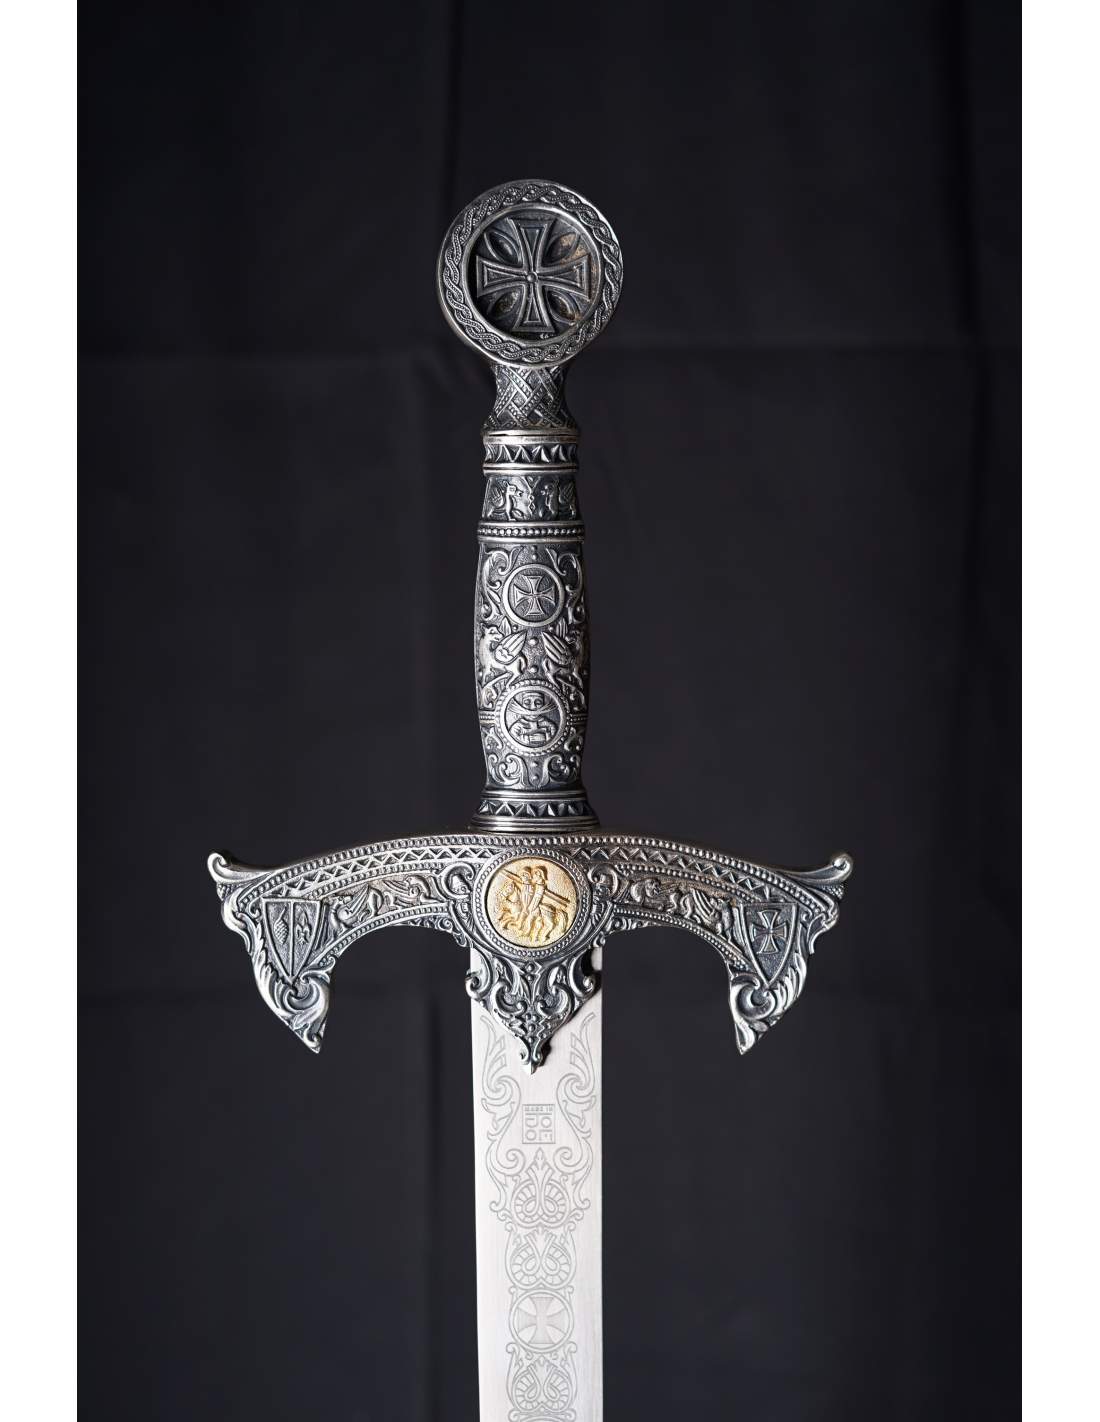 Sword Letter Opener 8 long Made in Spain silver and gold with red and black